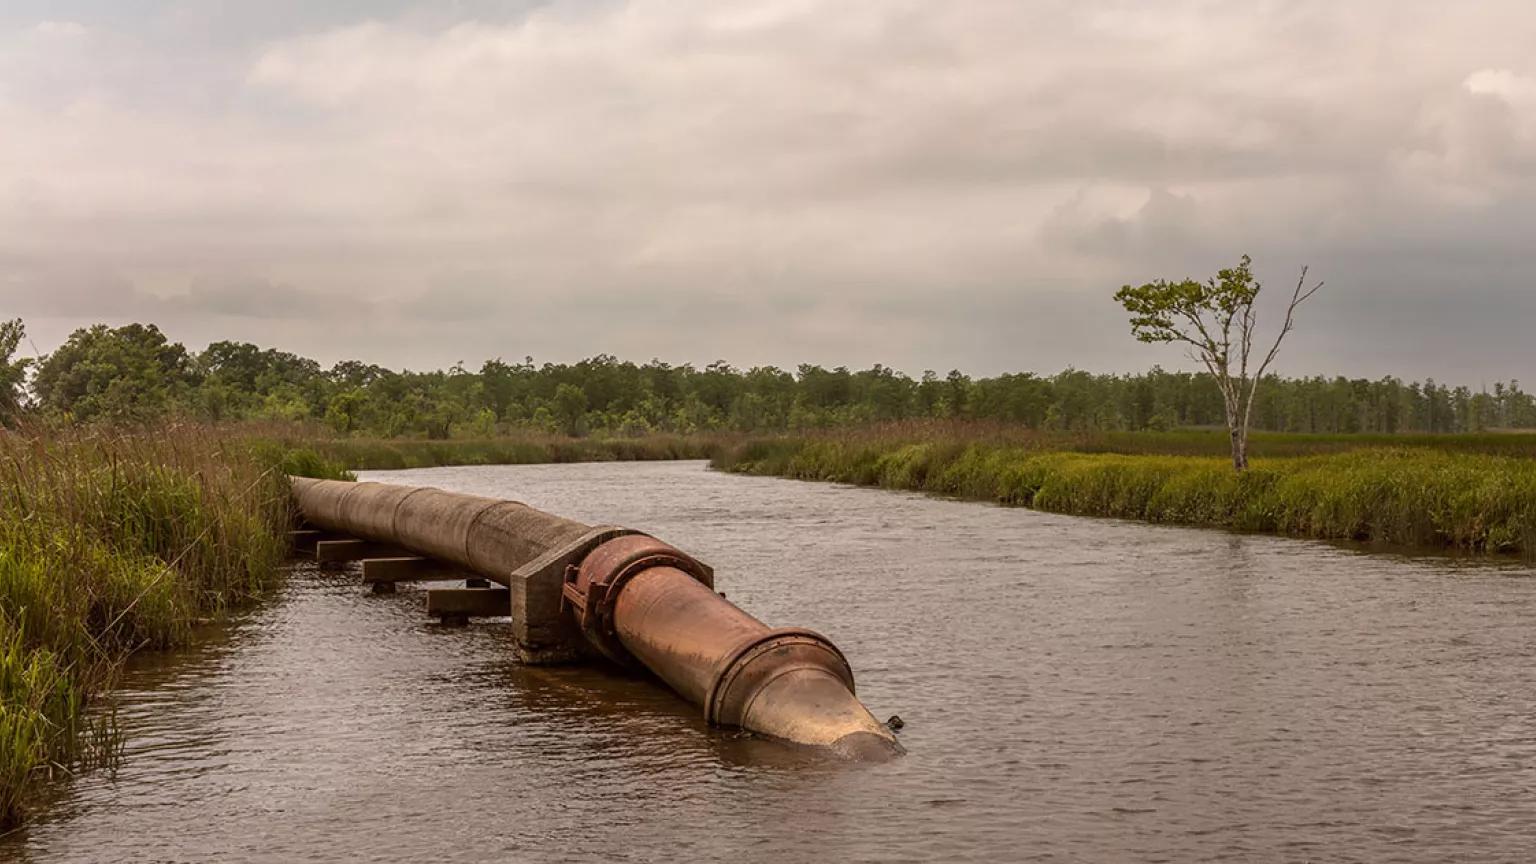 A large pipe extends from grassy land into a small river